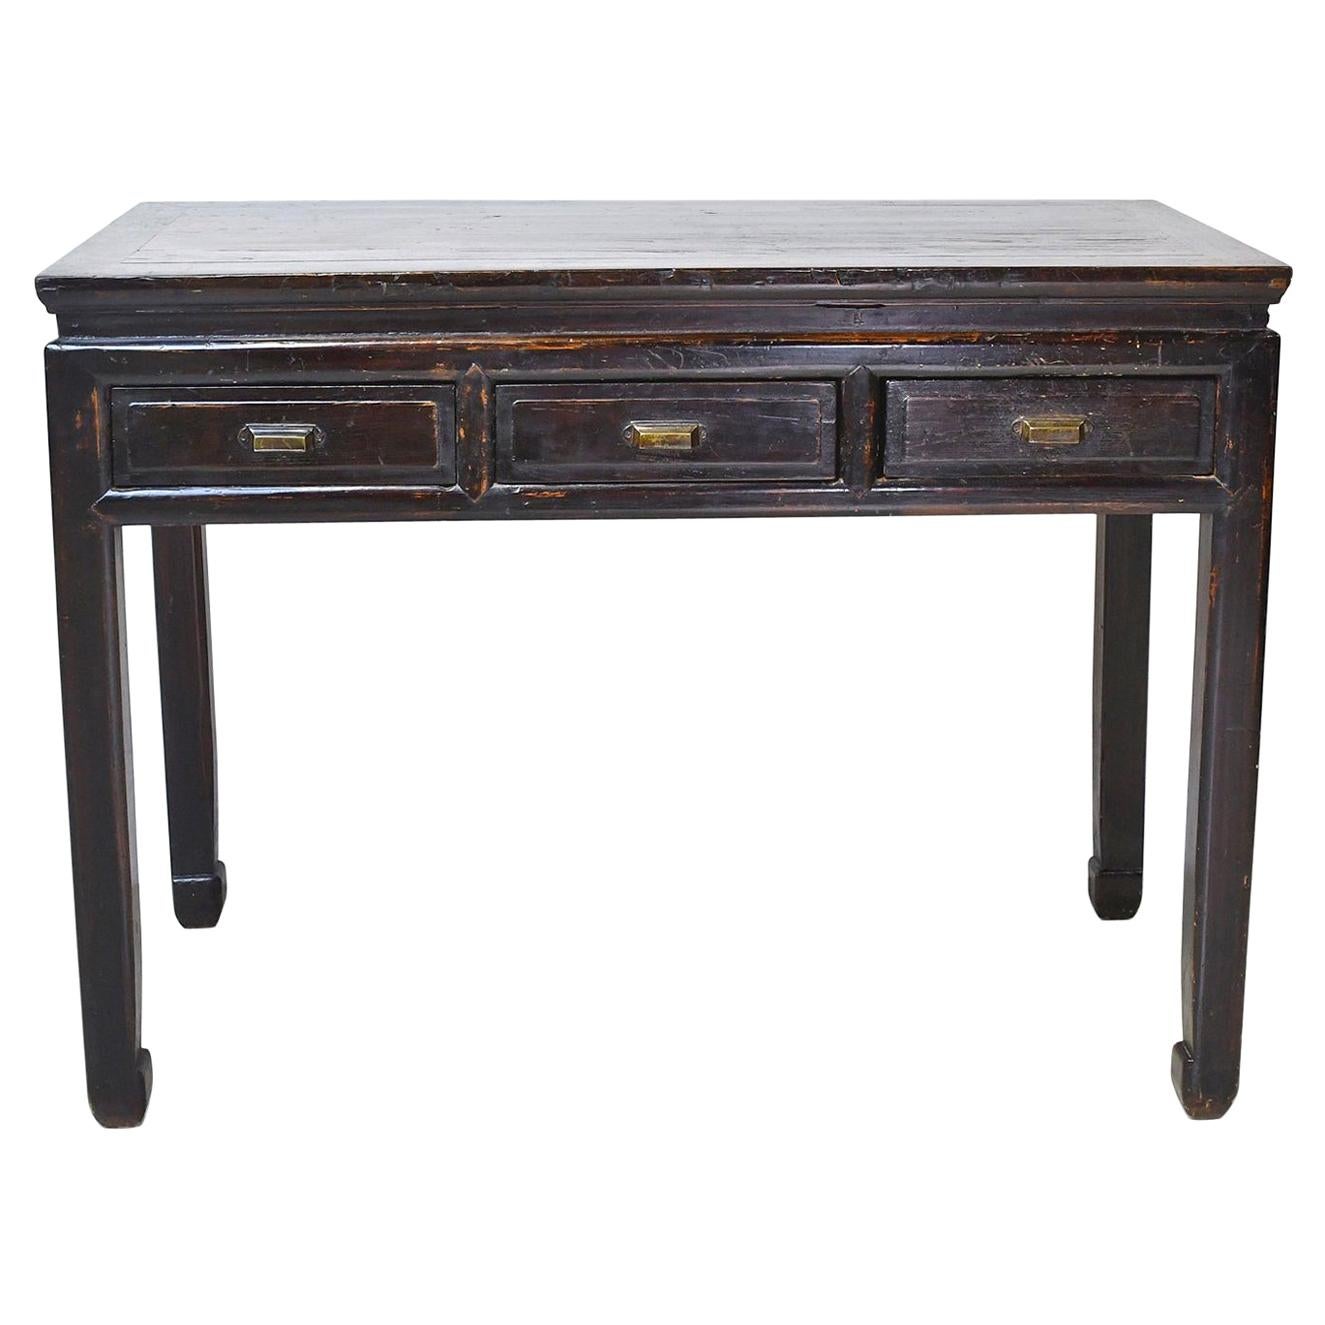 19th Century Qing Dynasty Chinese Sofa Table with Black Lacquer & Three Drawers For Sale